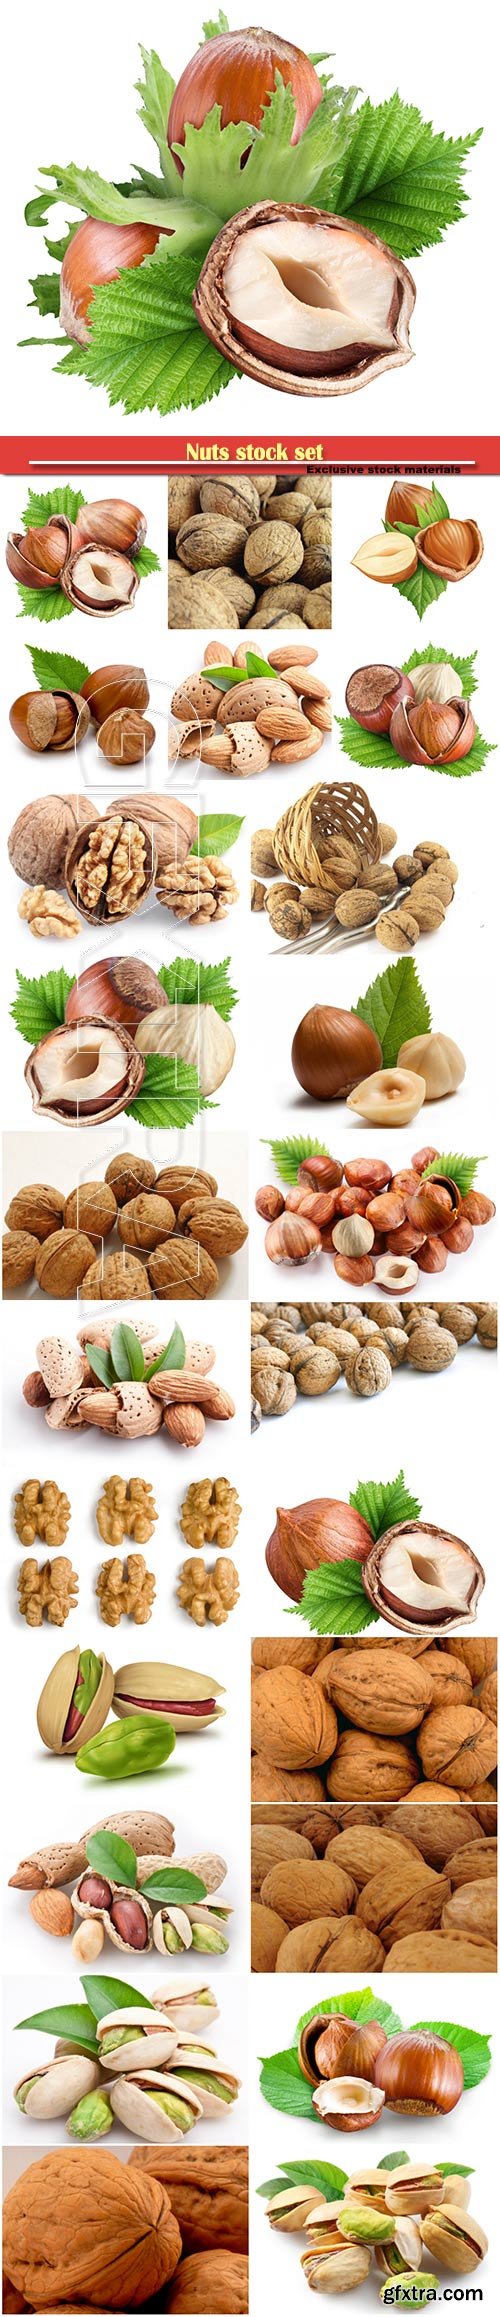 Nuts stock set